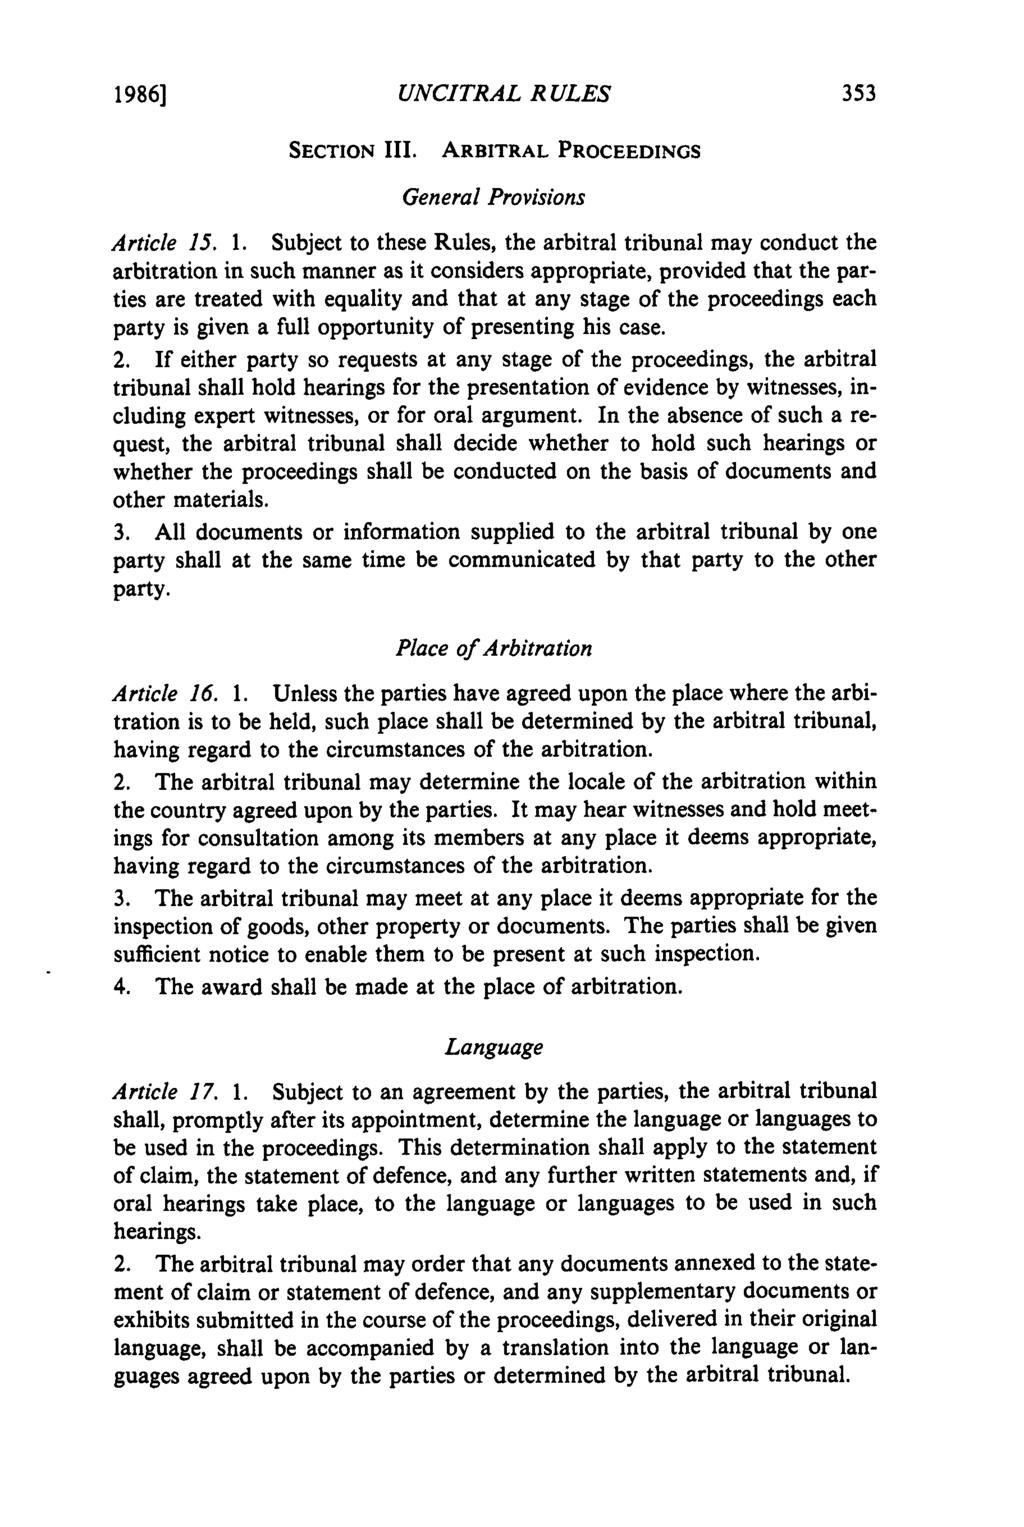 19861 UNCITRAL RULES SECTION III. ARBITRAL PROCEEDINGS General Provisions Article 15